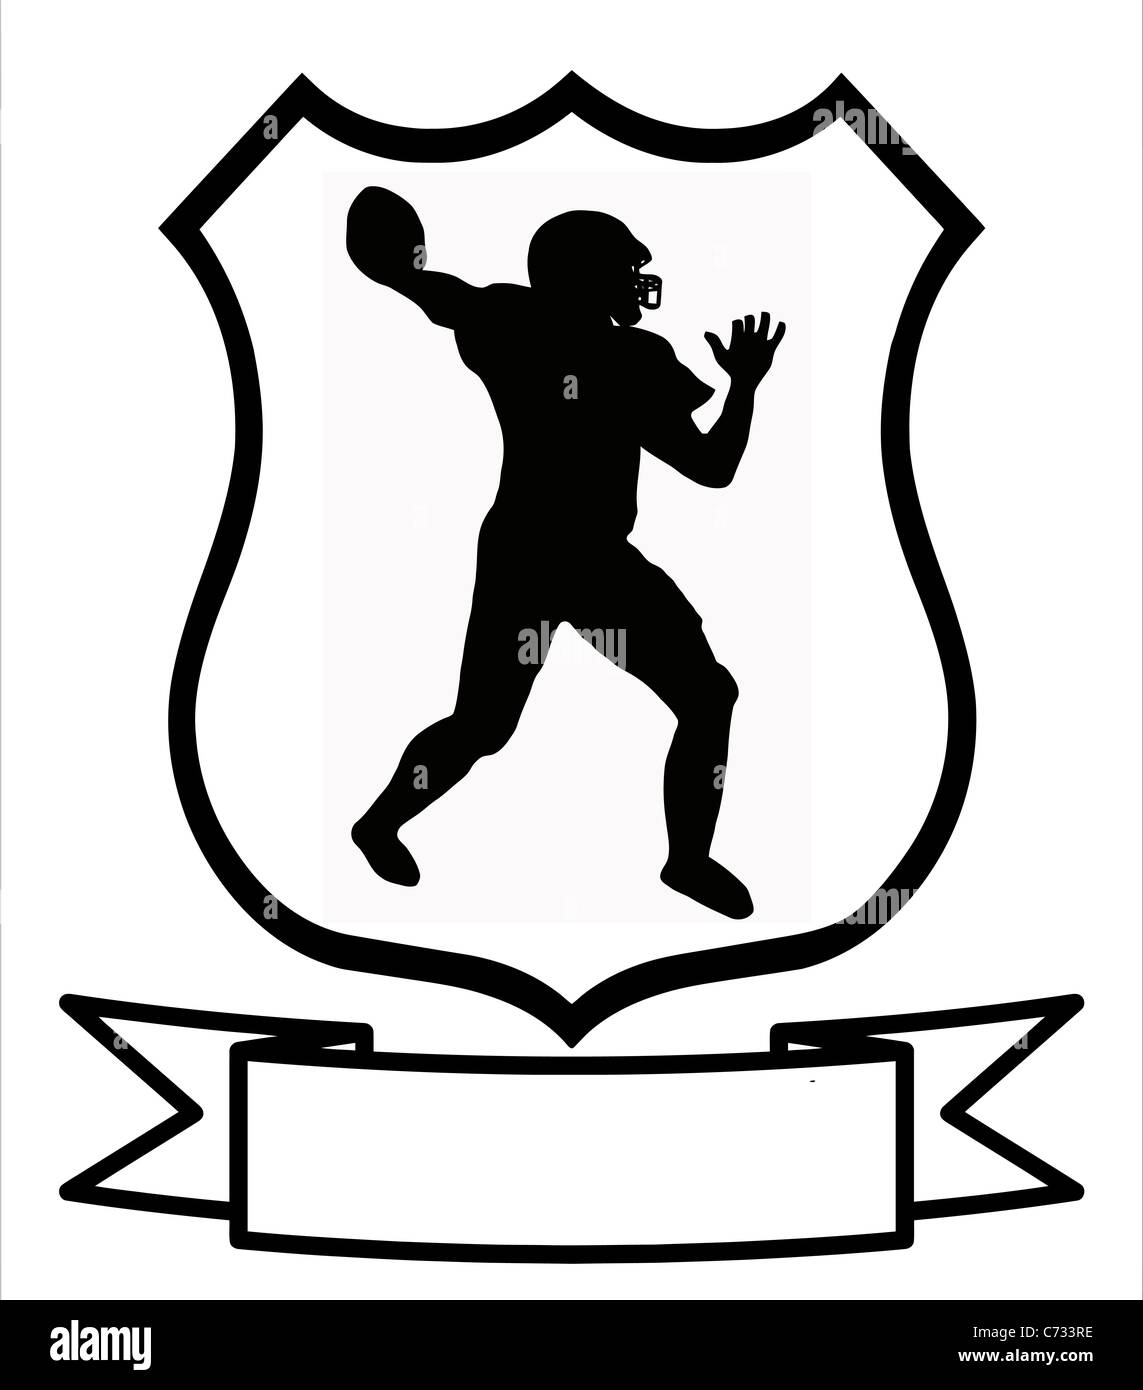 Pin by H B on Fútbol  Coat of arms, Badge, Sport football